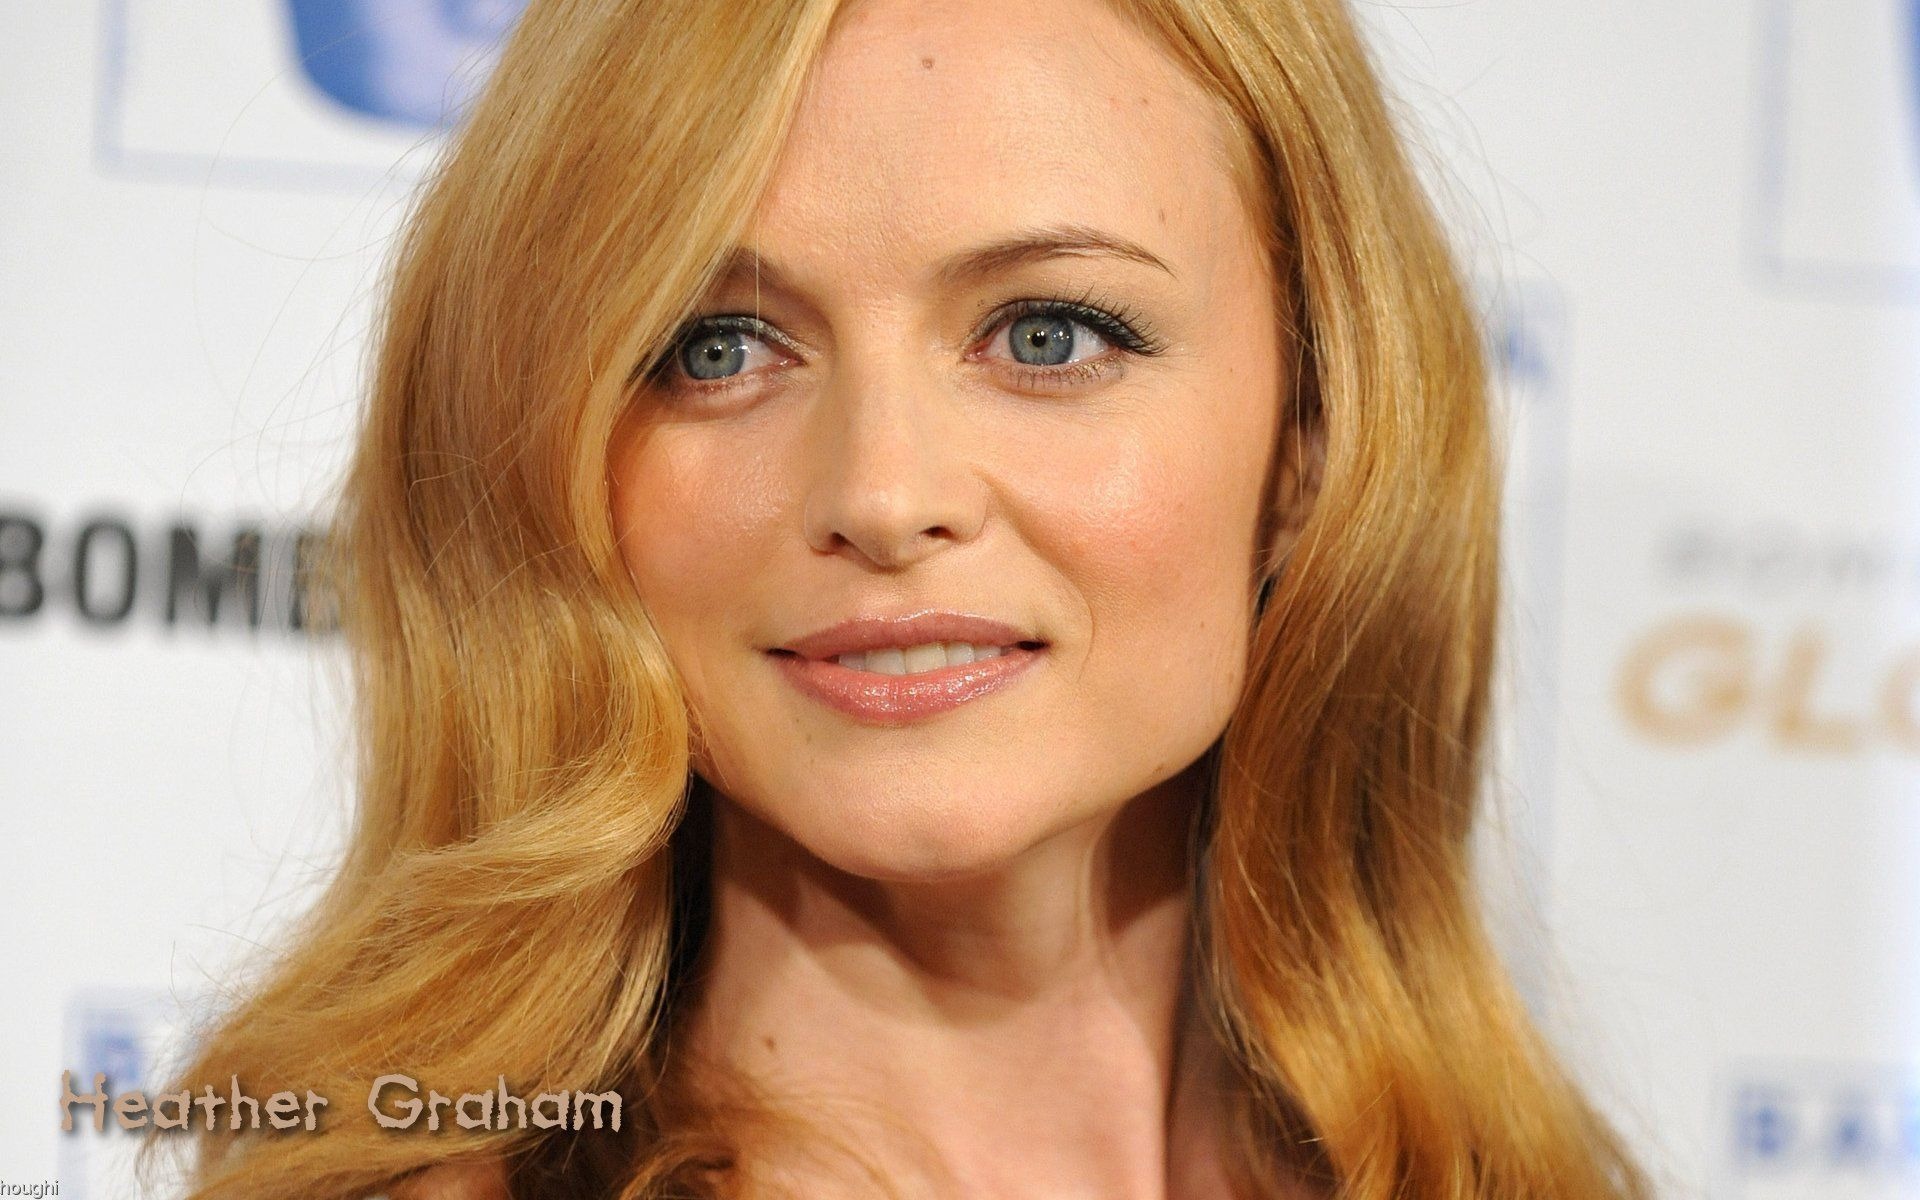 Heather Graham #003 - 1920x1200 Wallpapers Pictures Photos Images